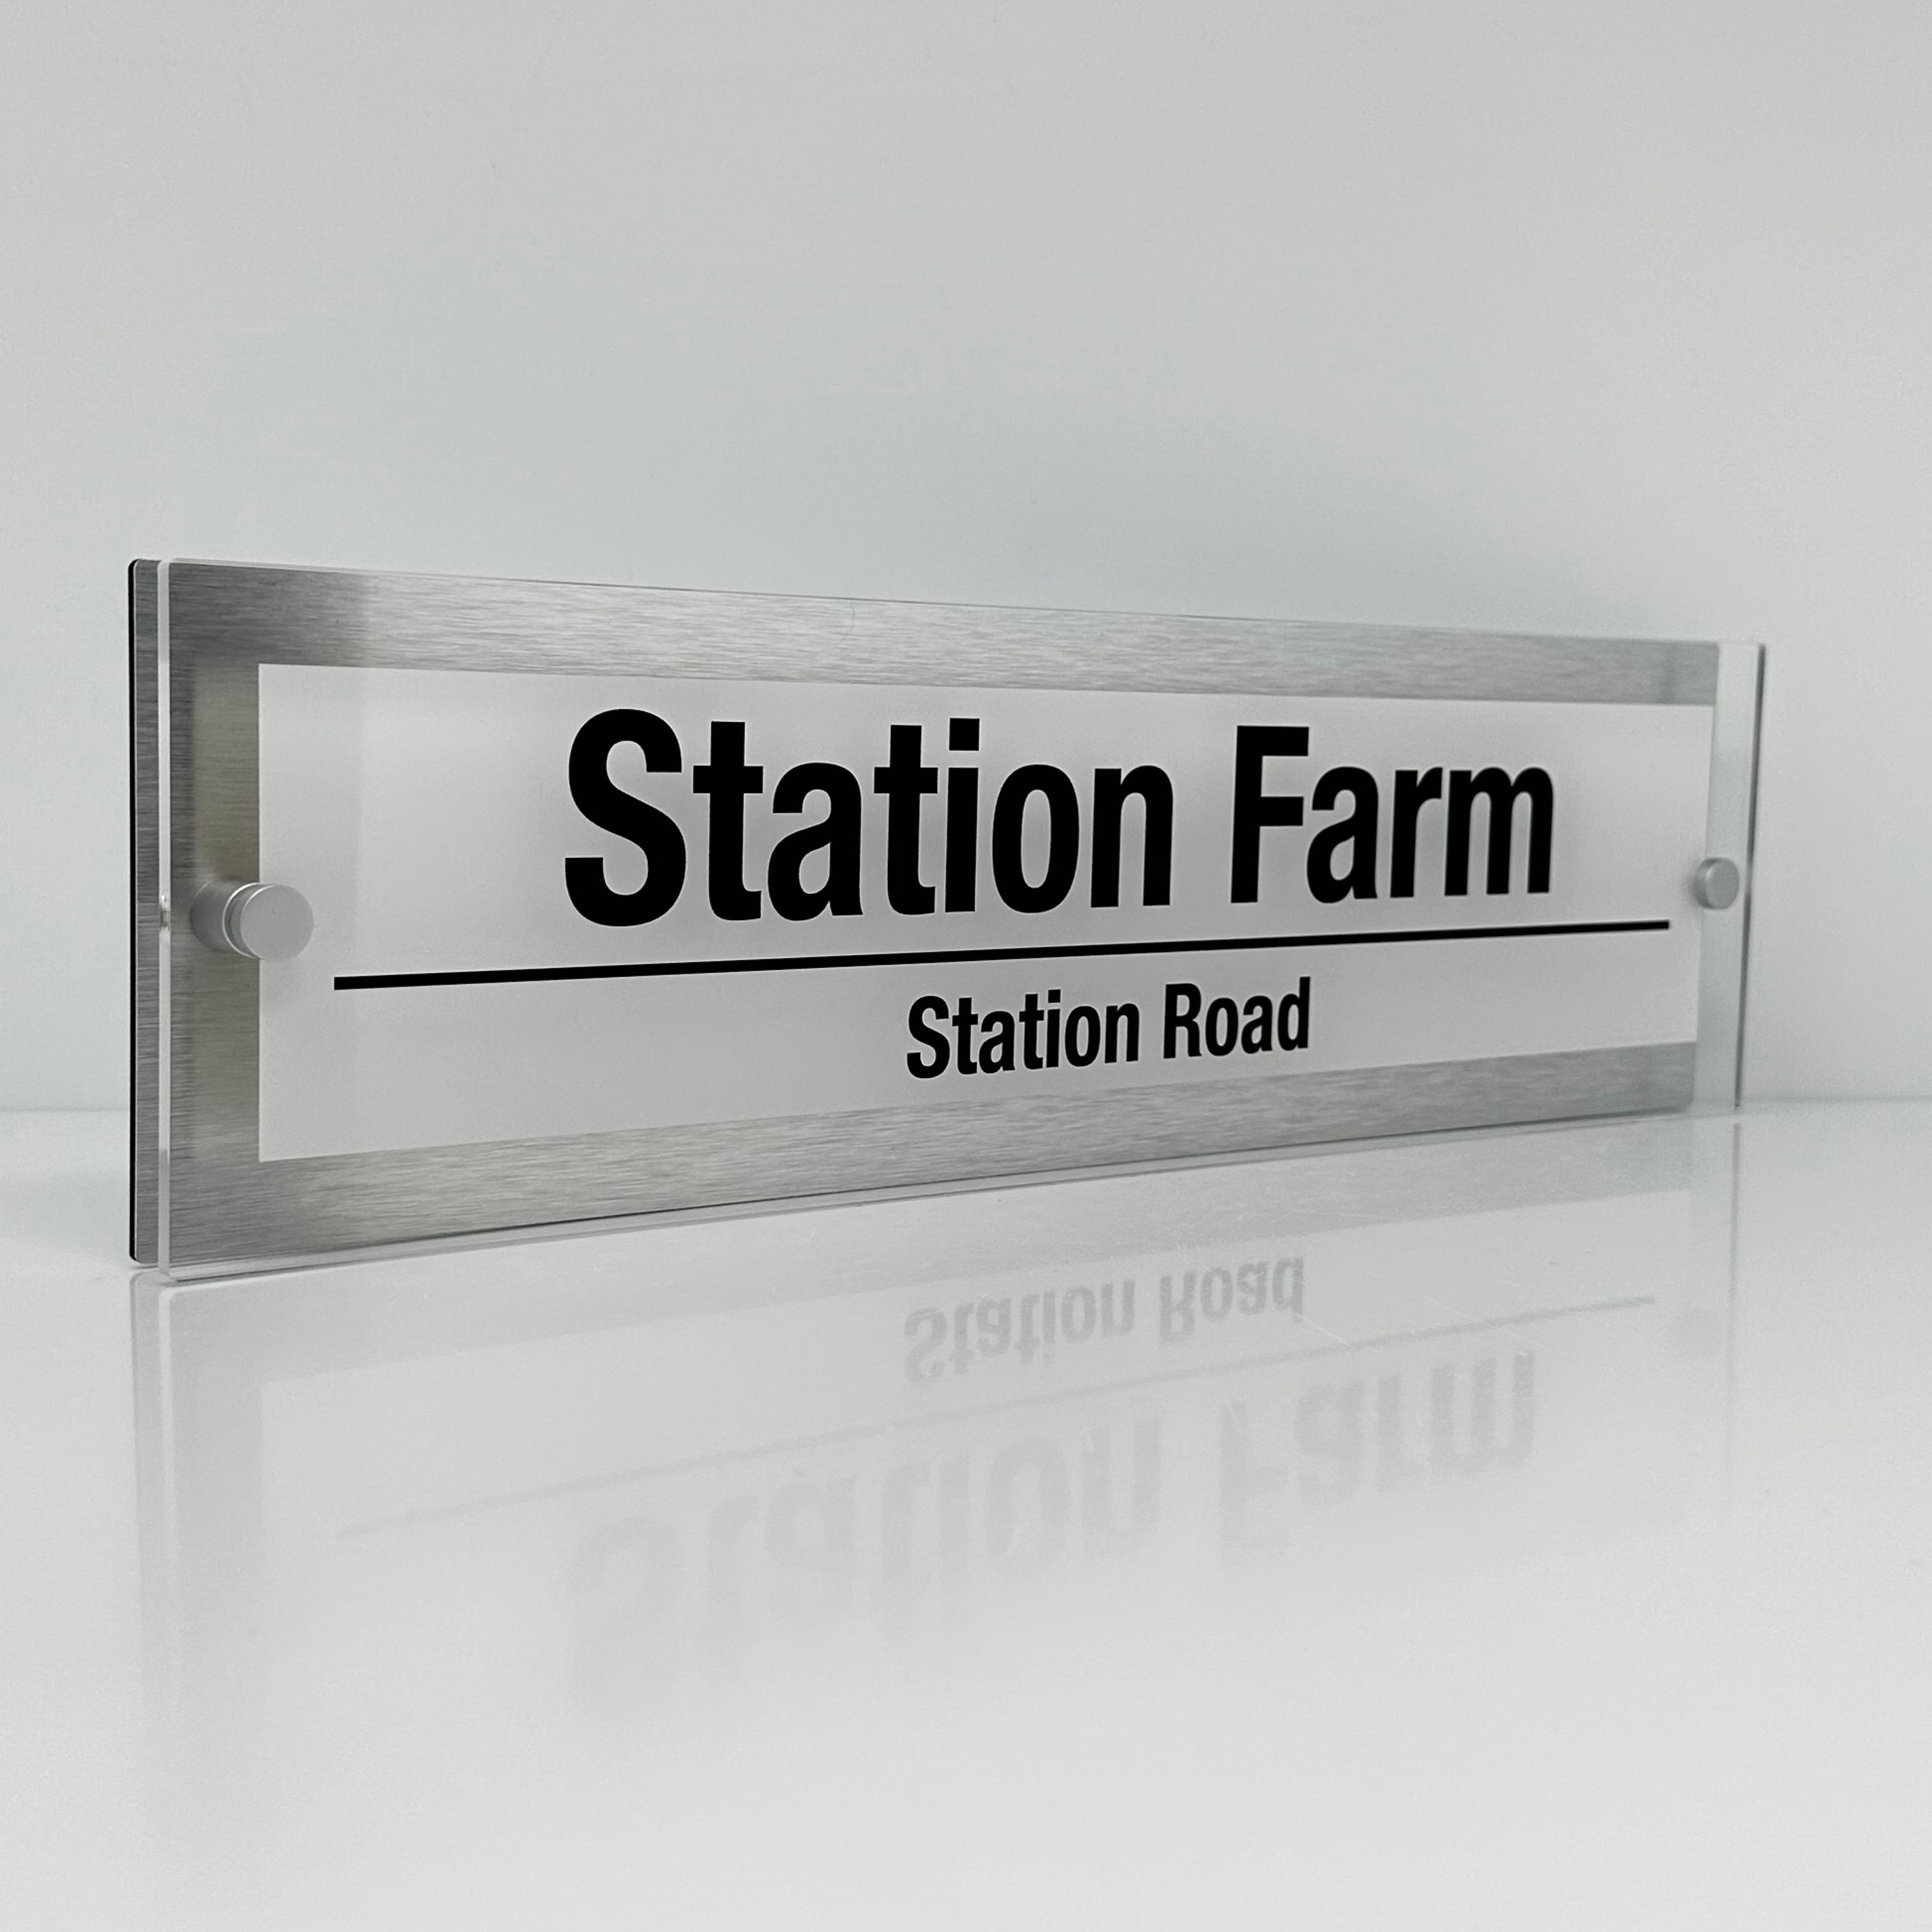 The Station Farm Modern House Sign with Perspex Acrylic Front, Silver Rear Panel and Satin Silver Stand Off Fixings ( Size - 42cm x 12cm - WHITE BACKGROUND BLACK TEXT )